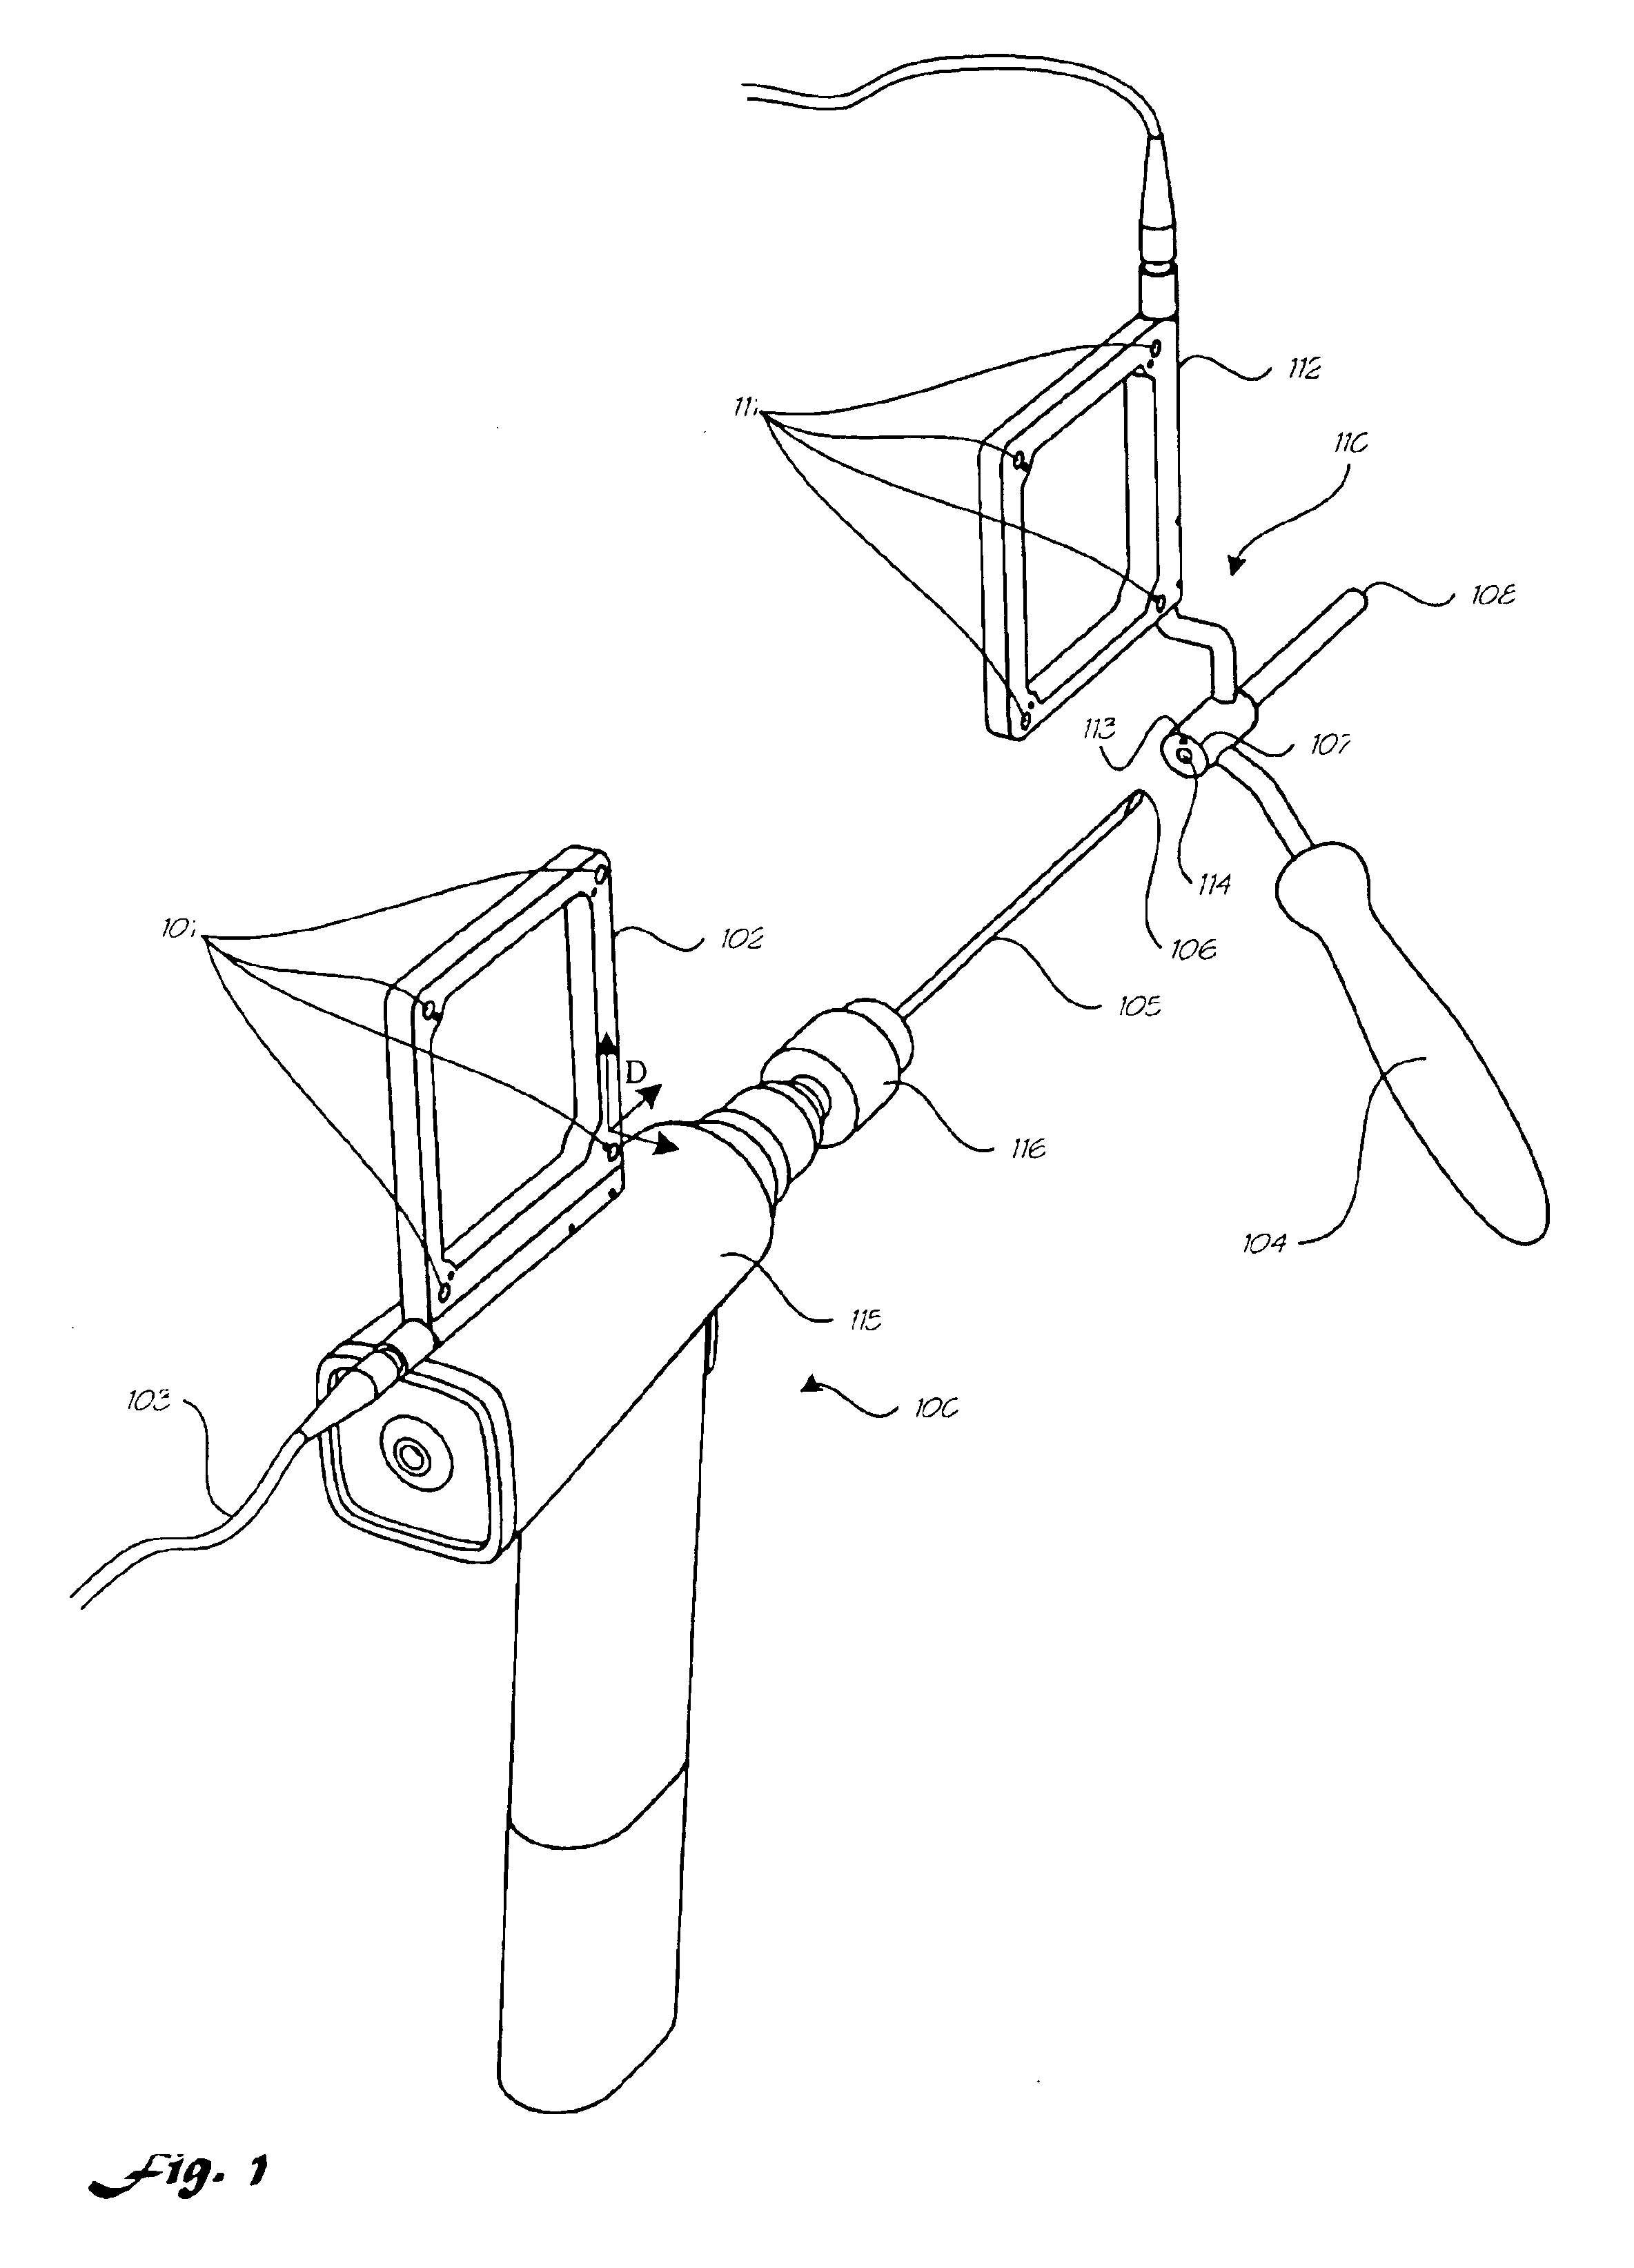 Surgical drill for use with a computer assisted surgery system